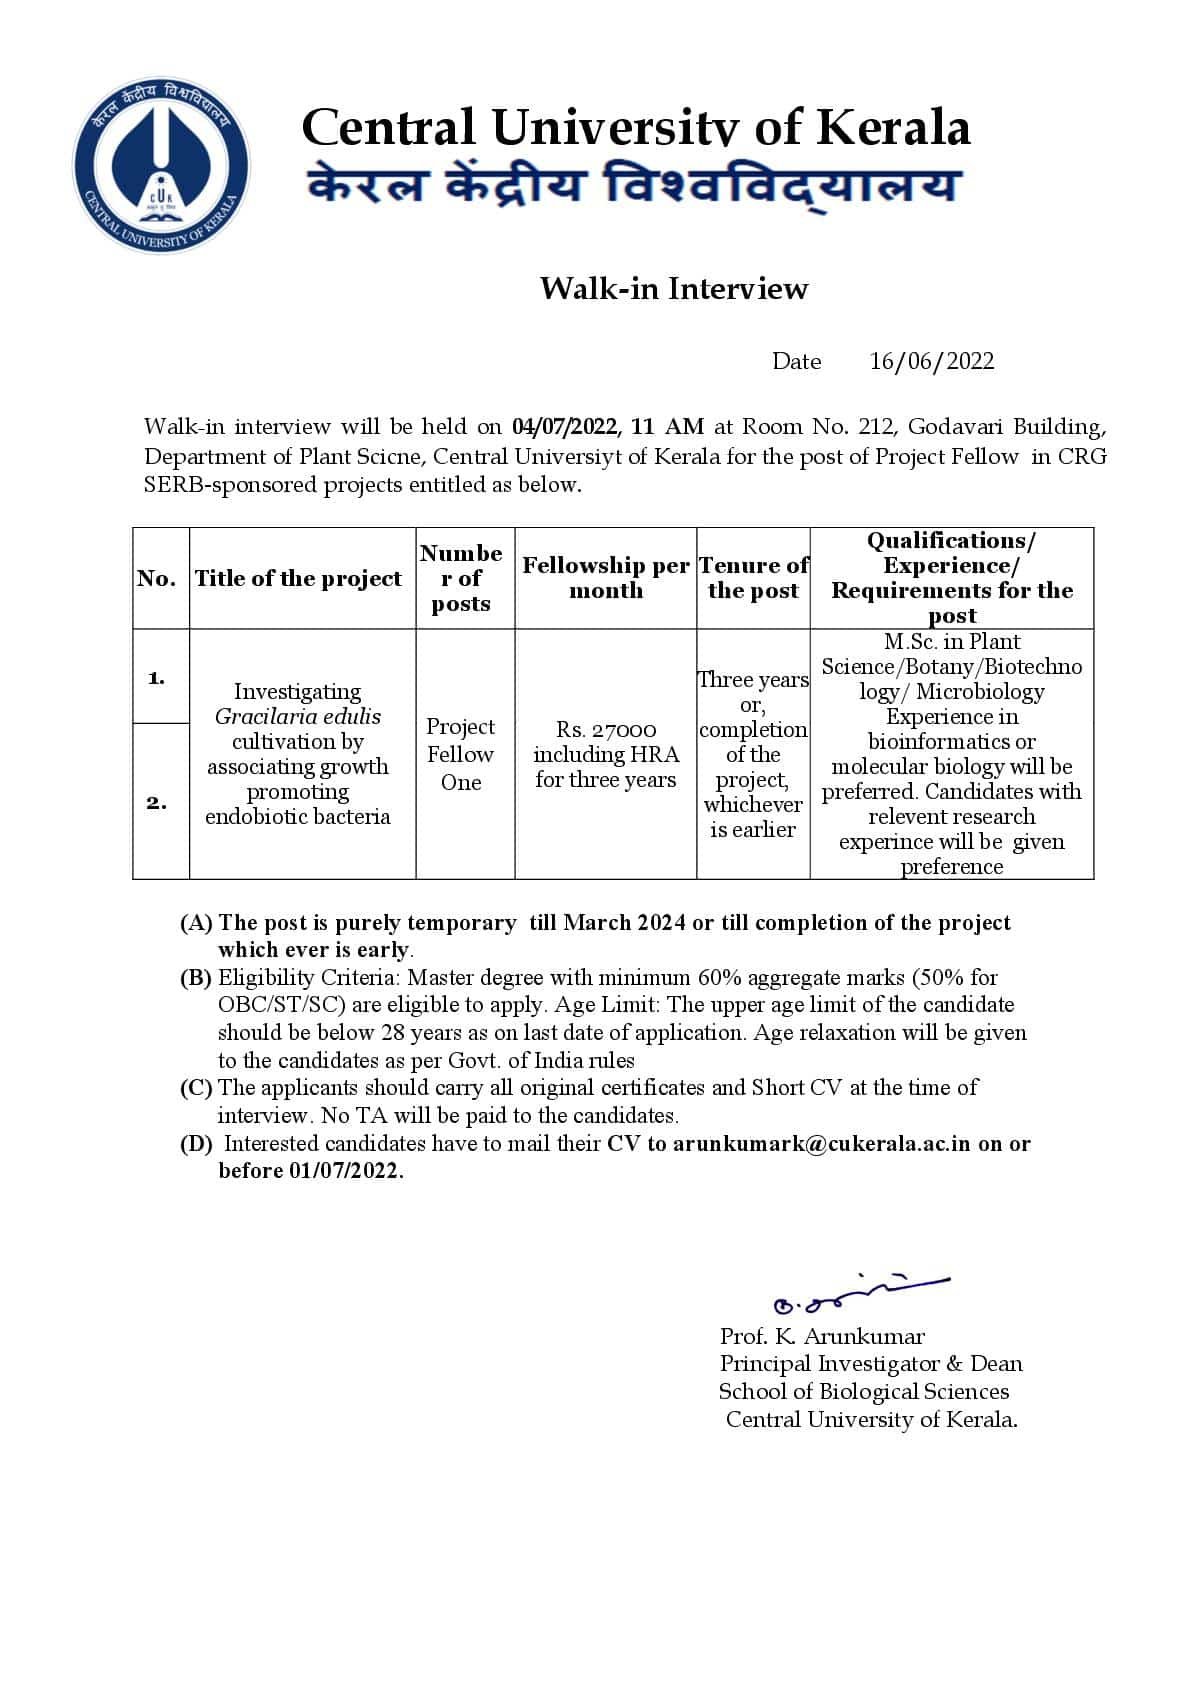 WALK IN INTERVIEW FOR THE POST OF PROJECT FELLOW IN THE DEPARTMENT OF PLANT SCIENCE